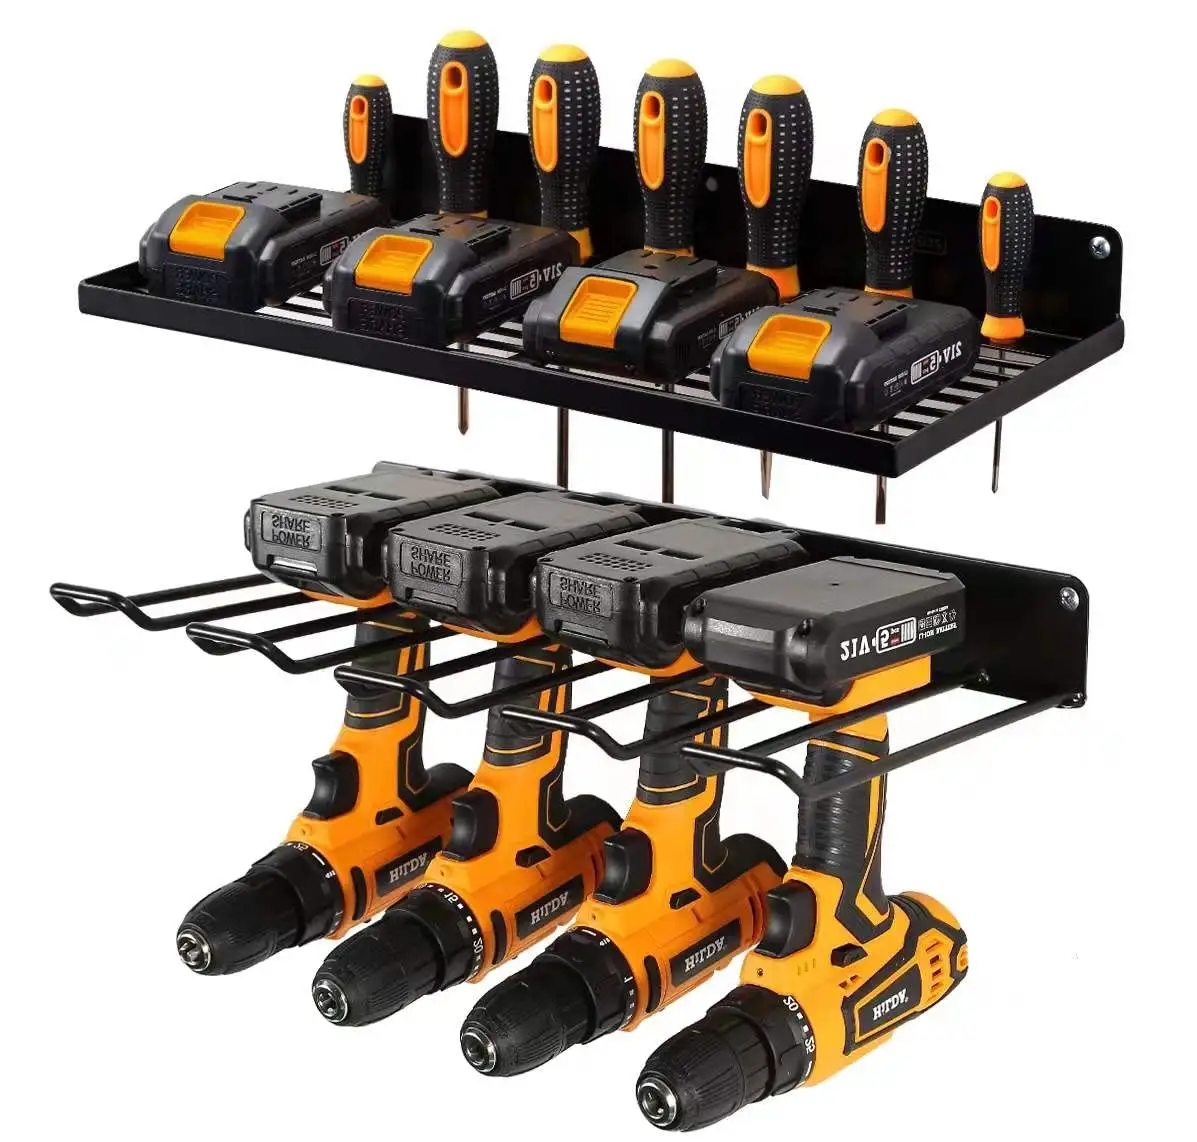 Power Tool Organizer with Charging Station Drill Holder Wall Mount Garage Storage Shelves for Organization